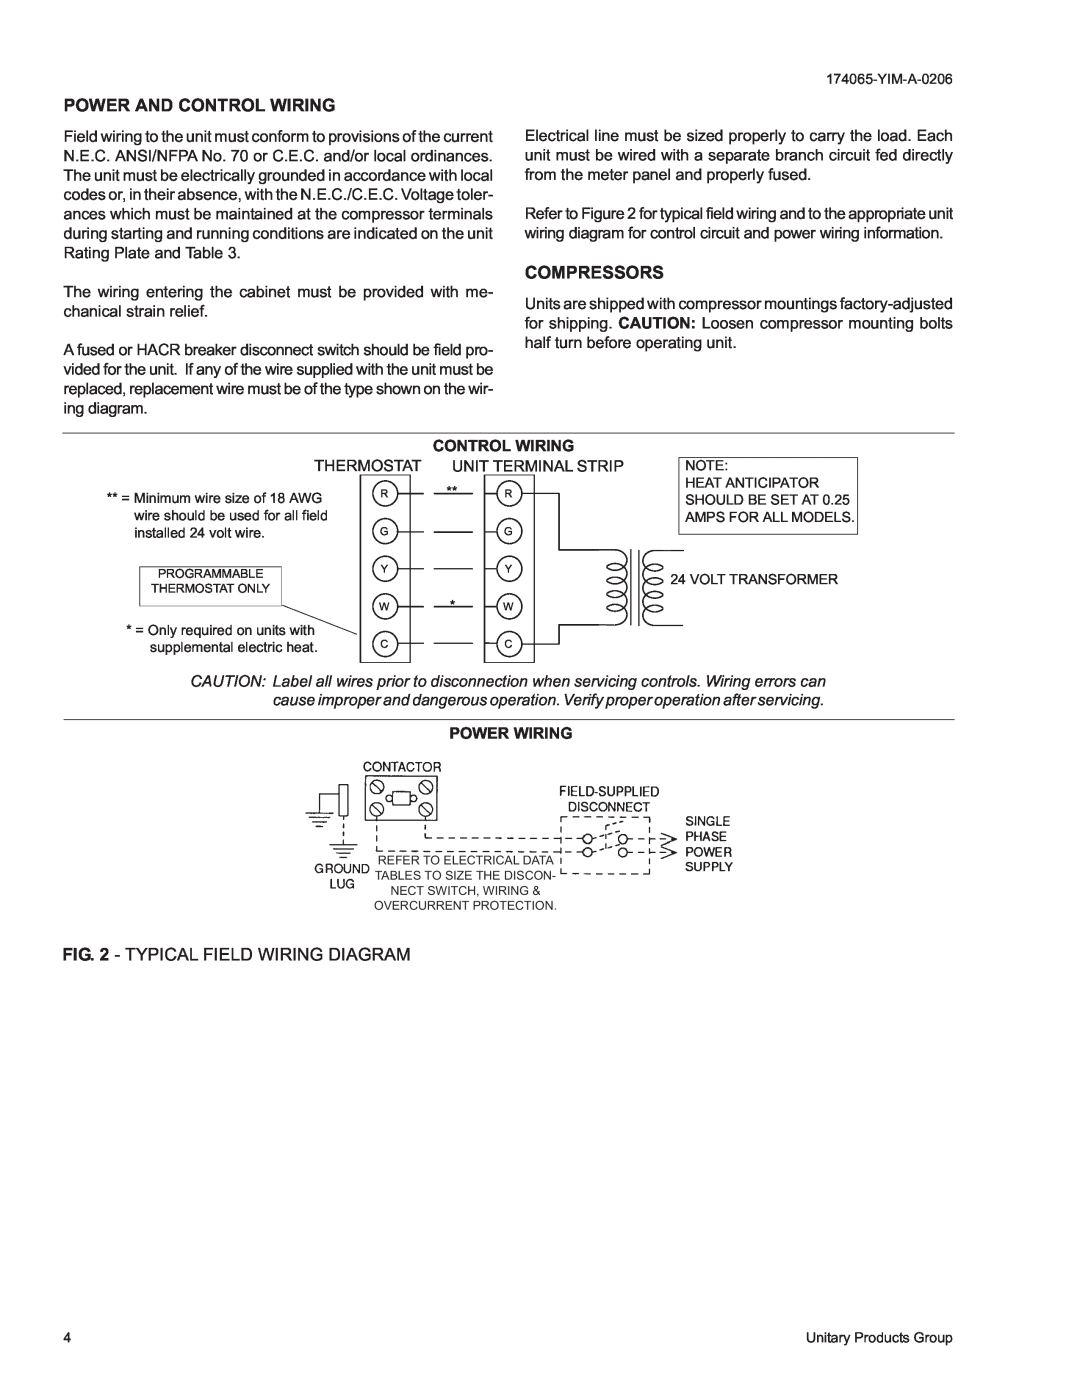 York D2EB installation instructions Power And Control Wiring, Compressors, Typical Field Wiring Diagram, Power Wiring 